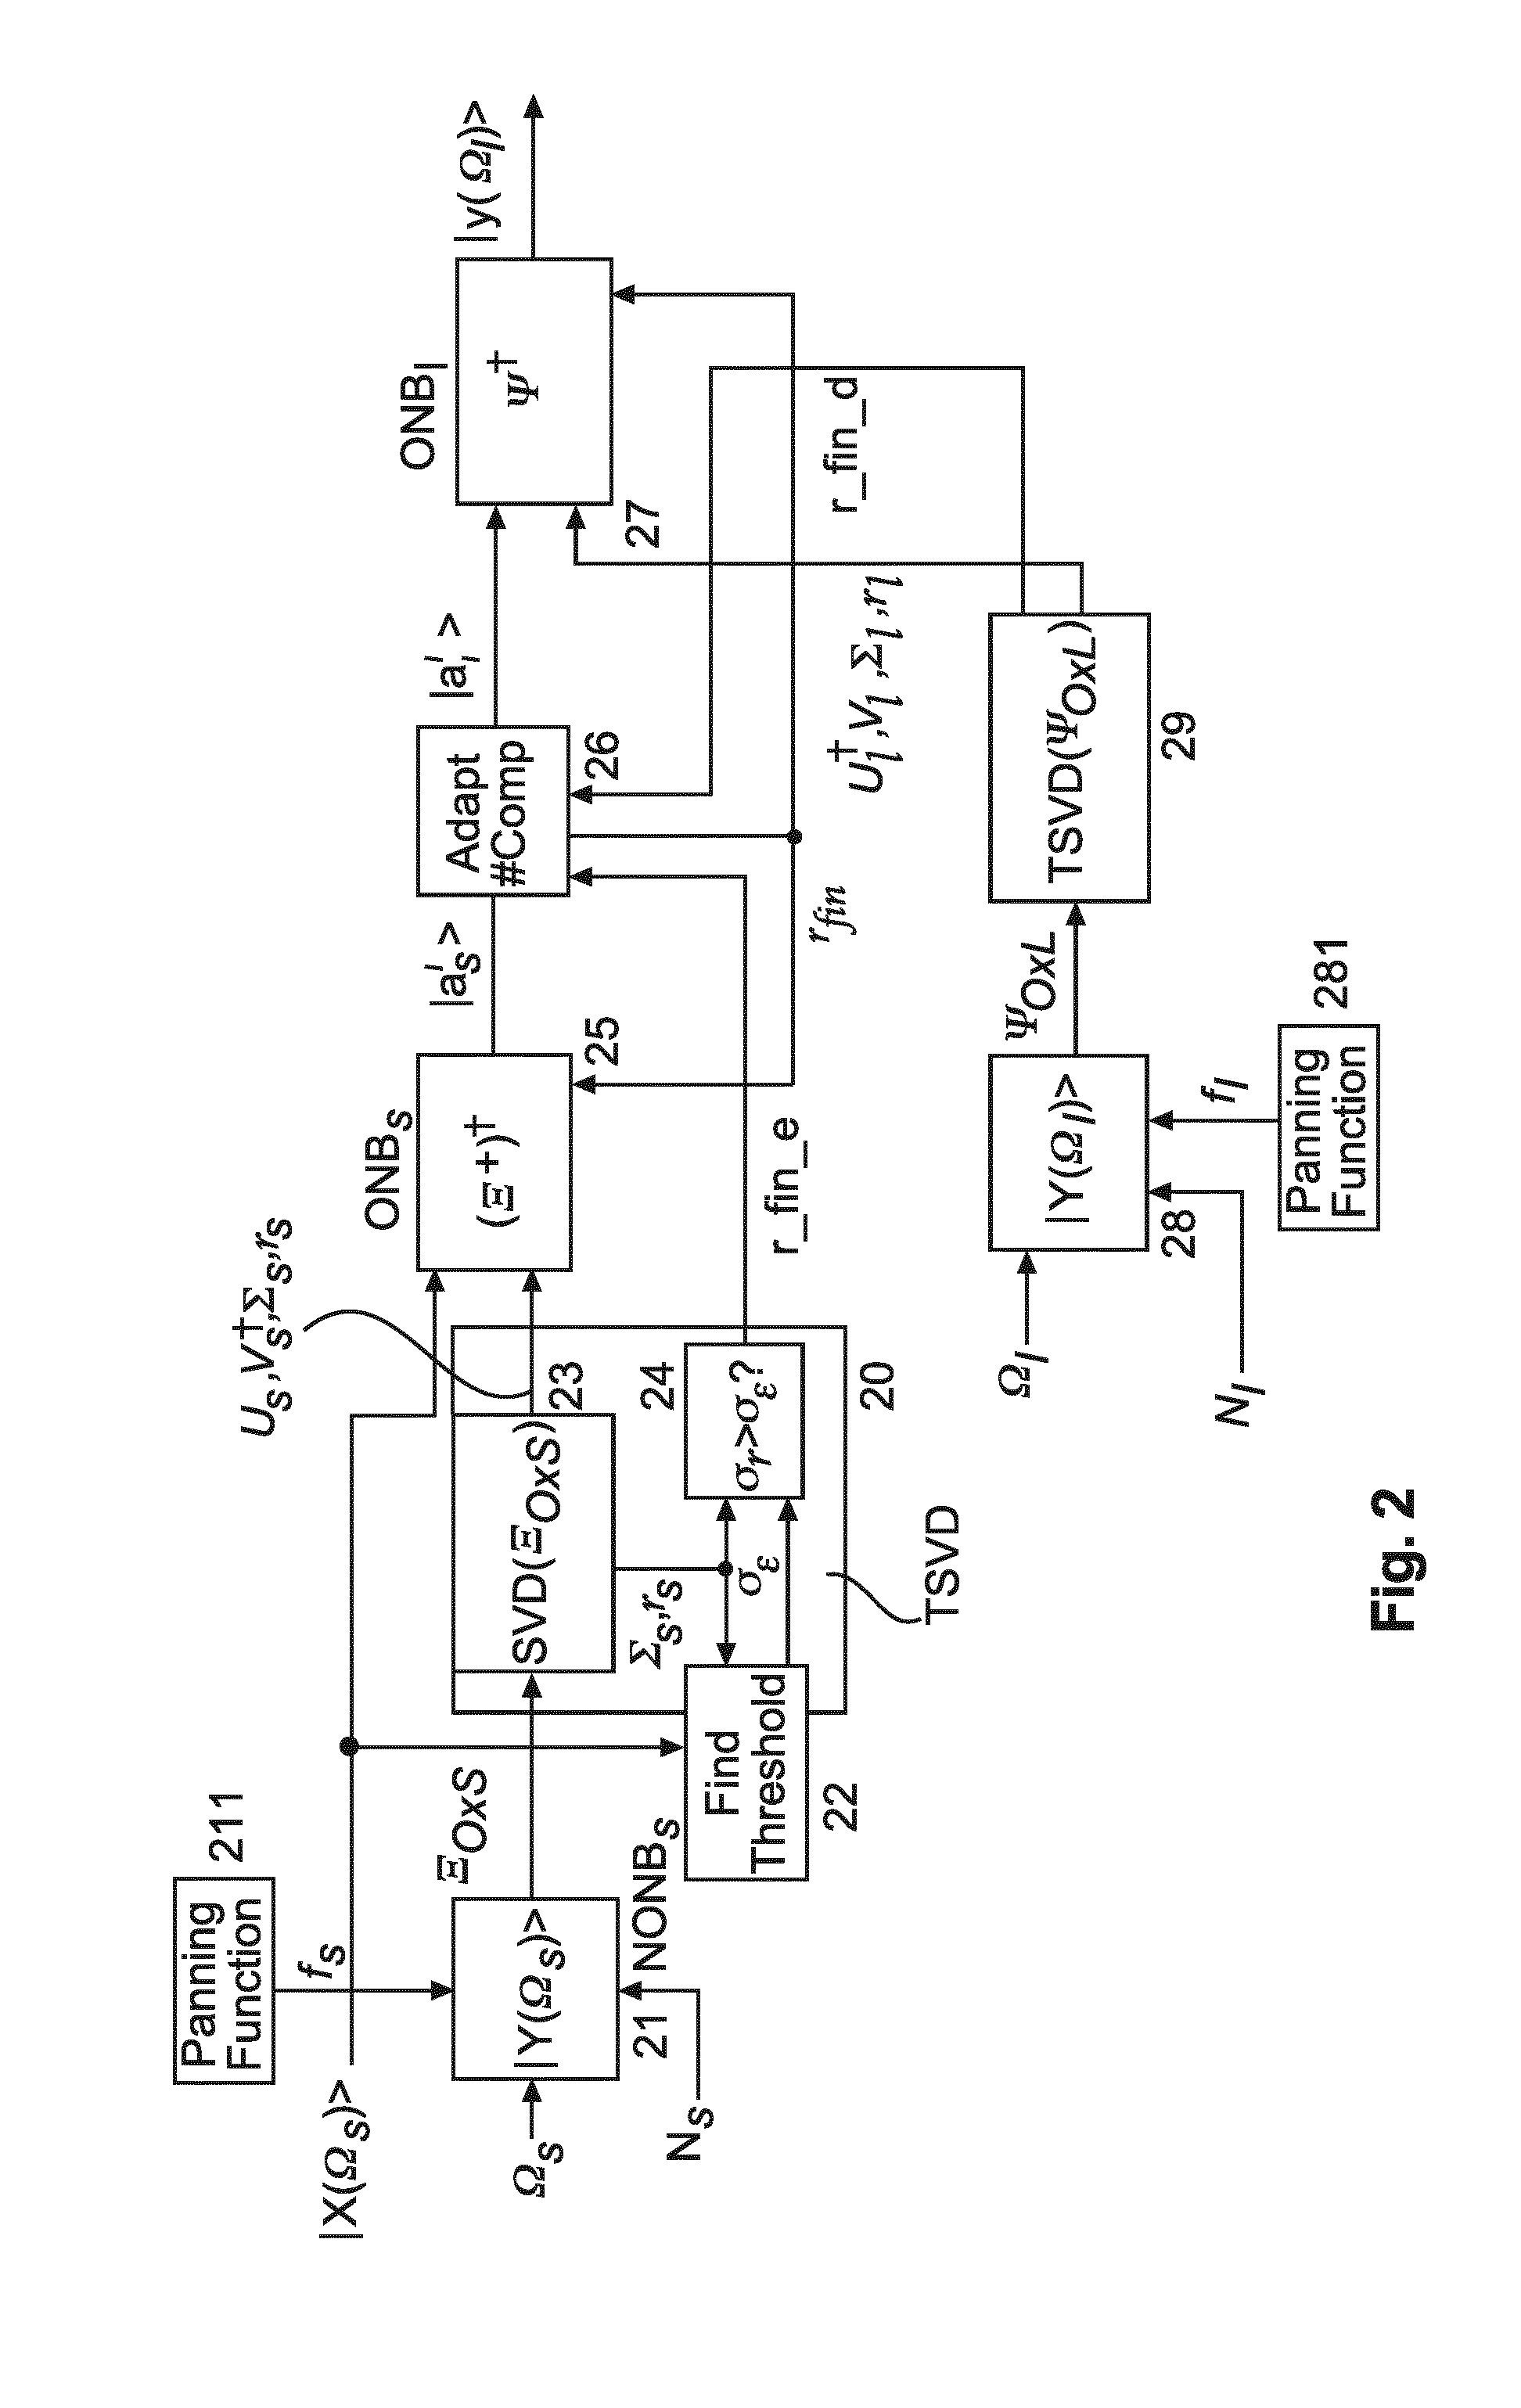 Method and apparatus for higher order ambisonics encoding and decoding using singular value decomposition